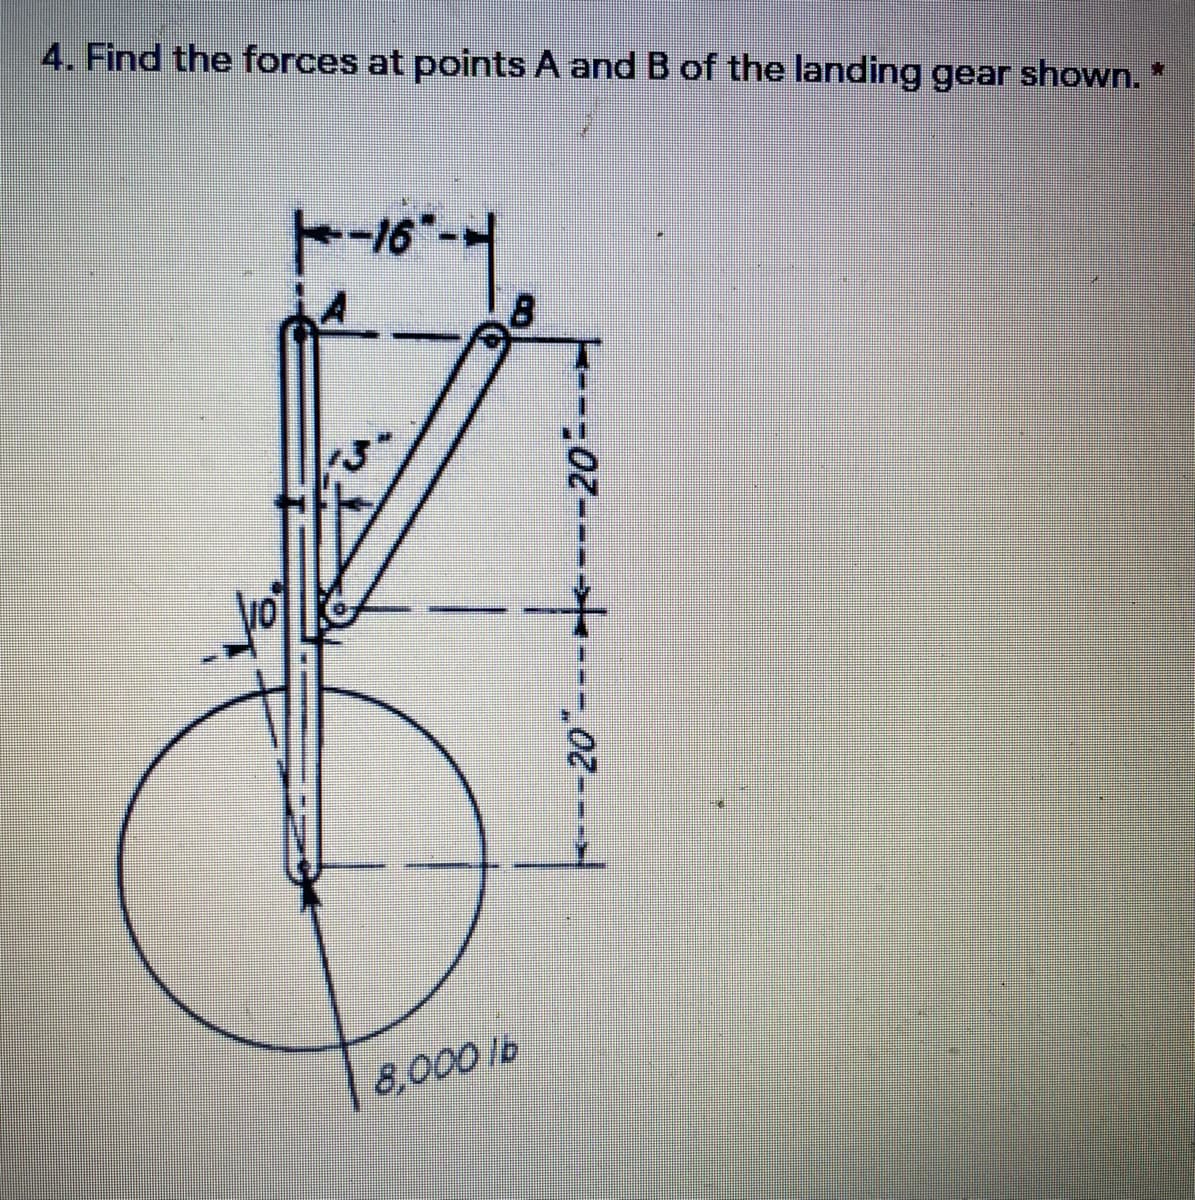 4. Find the forces at points A and B of the landing gear shown.
トー16"
8,000 b
